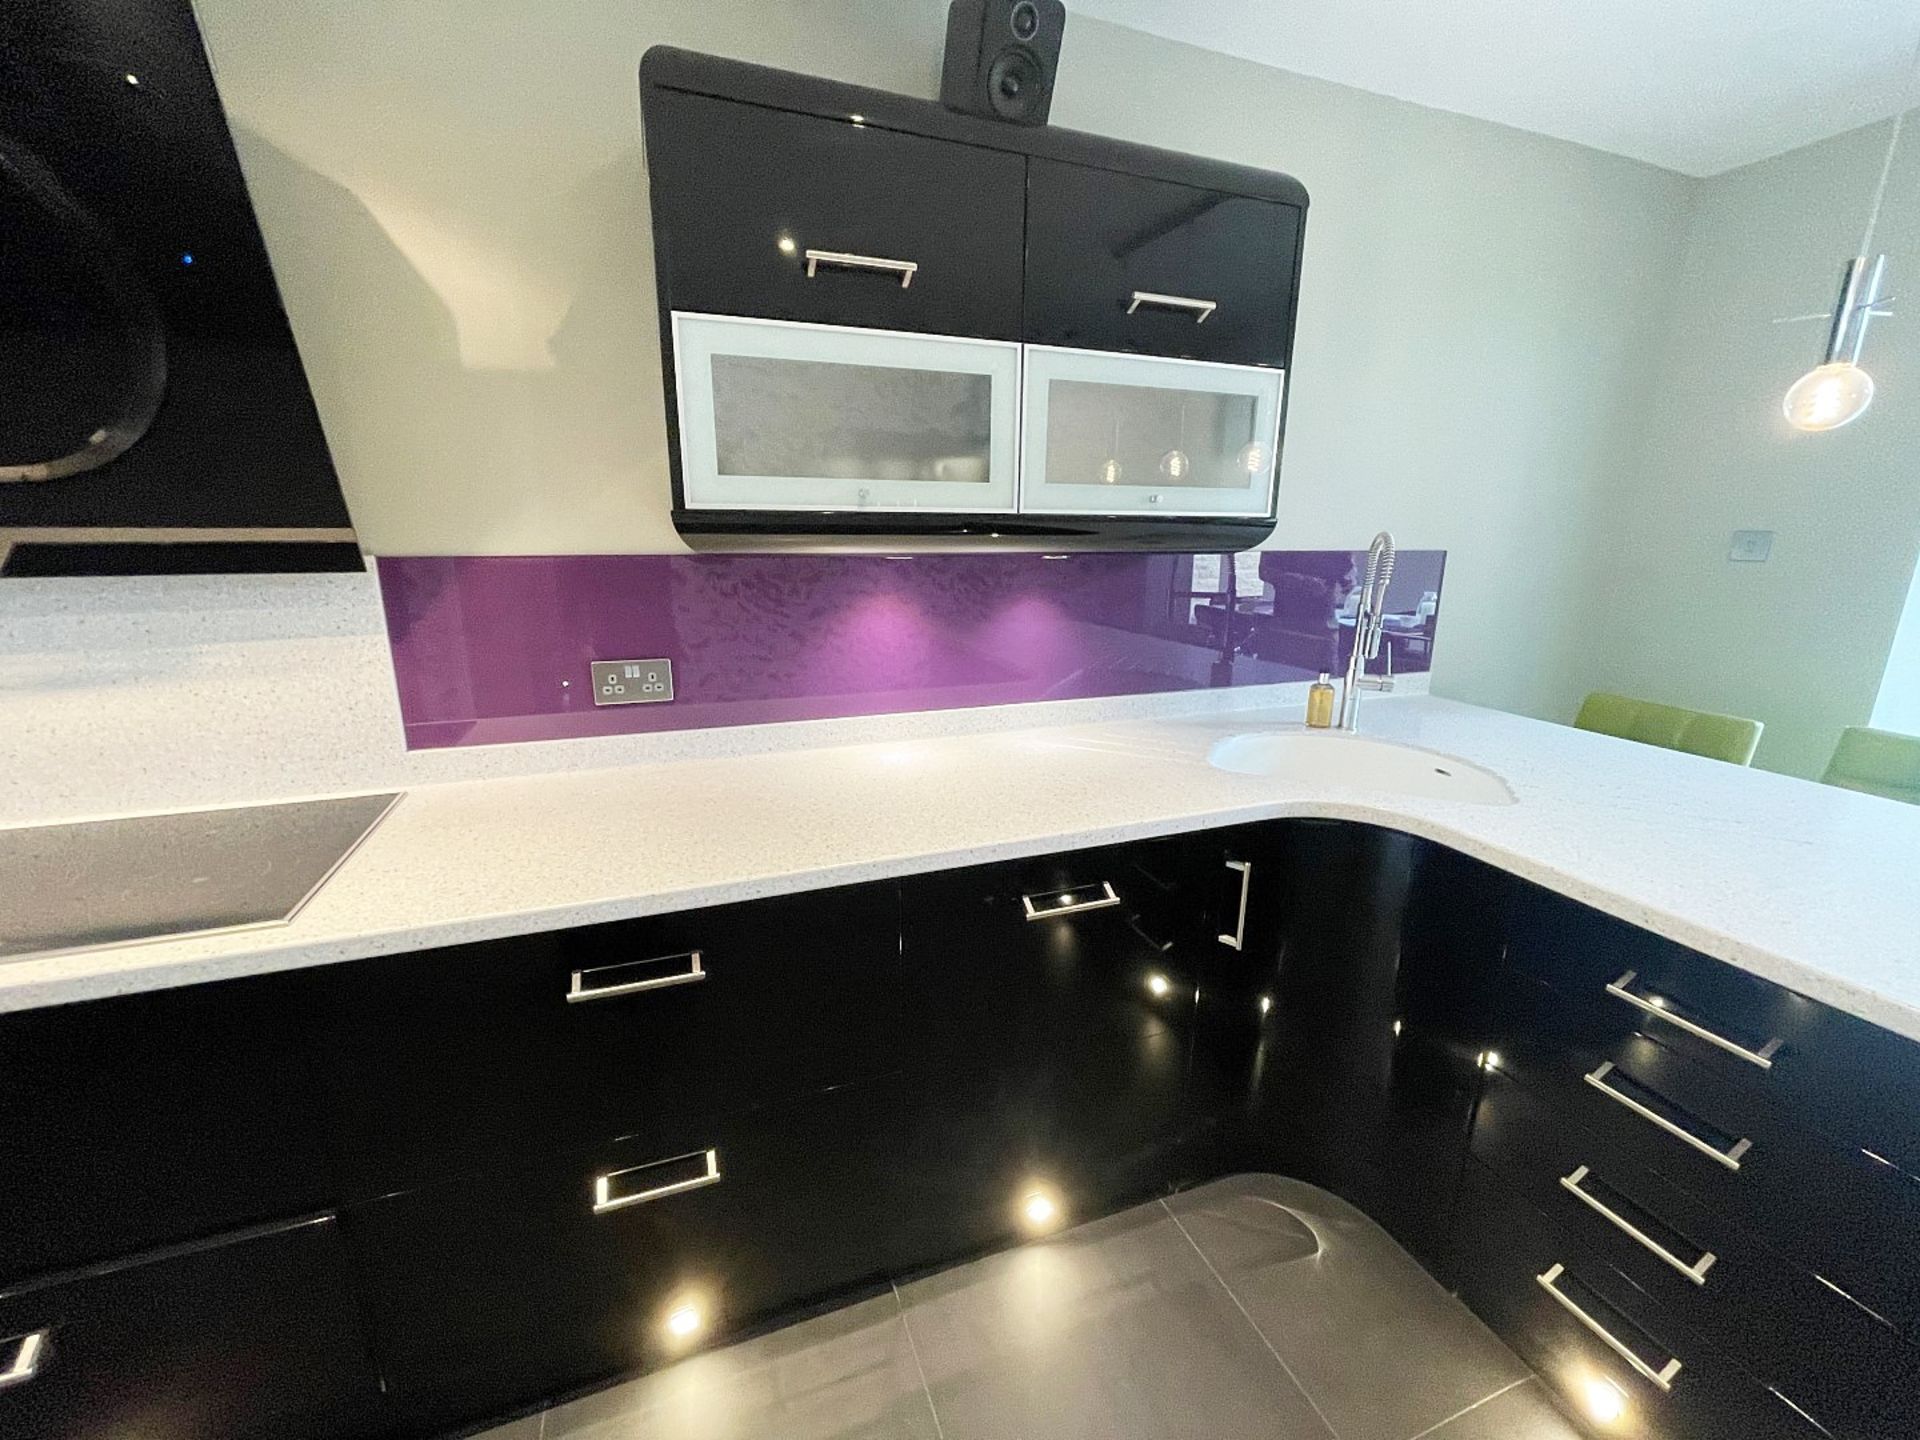 1 x MAGNET Modern Black Gloss Fitted Kitchen With Premium Branded Appliances + Corian Worktops - Image 19 of 62